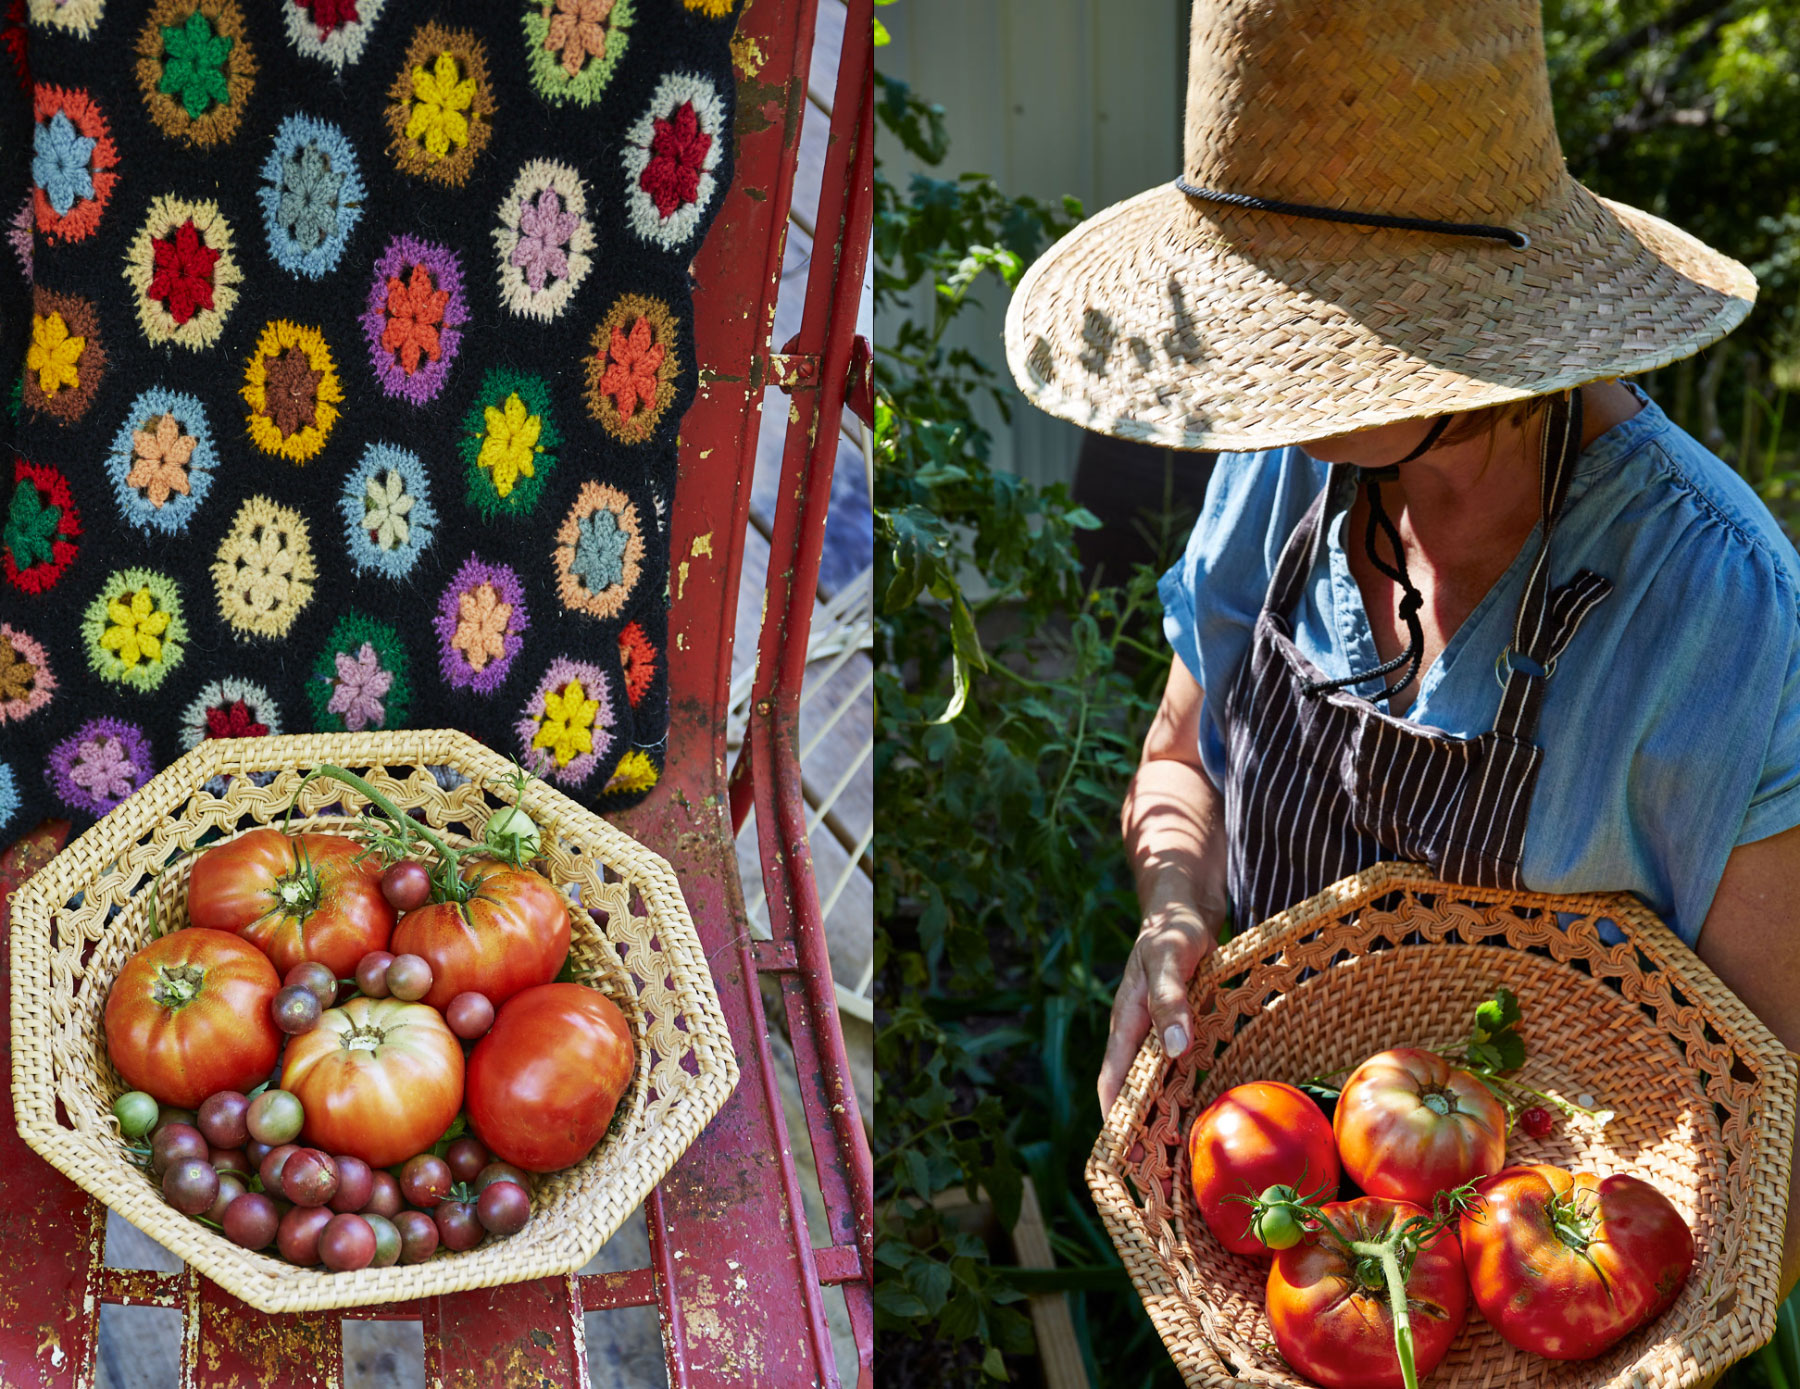 Tomatoes on quilt on red chair